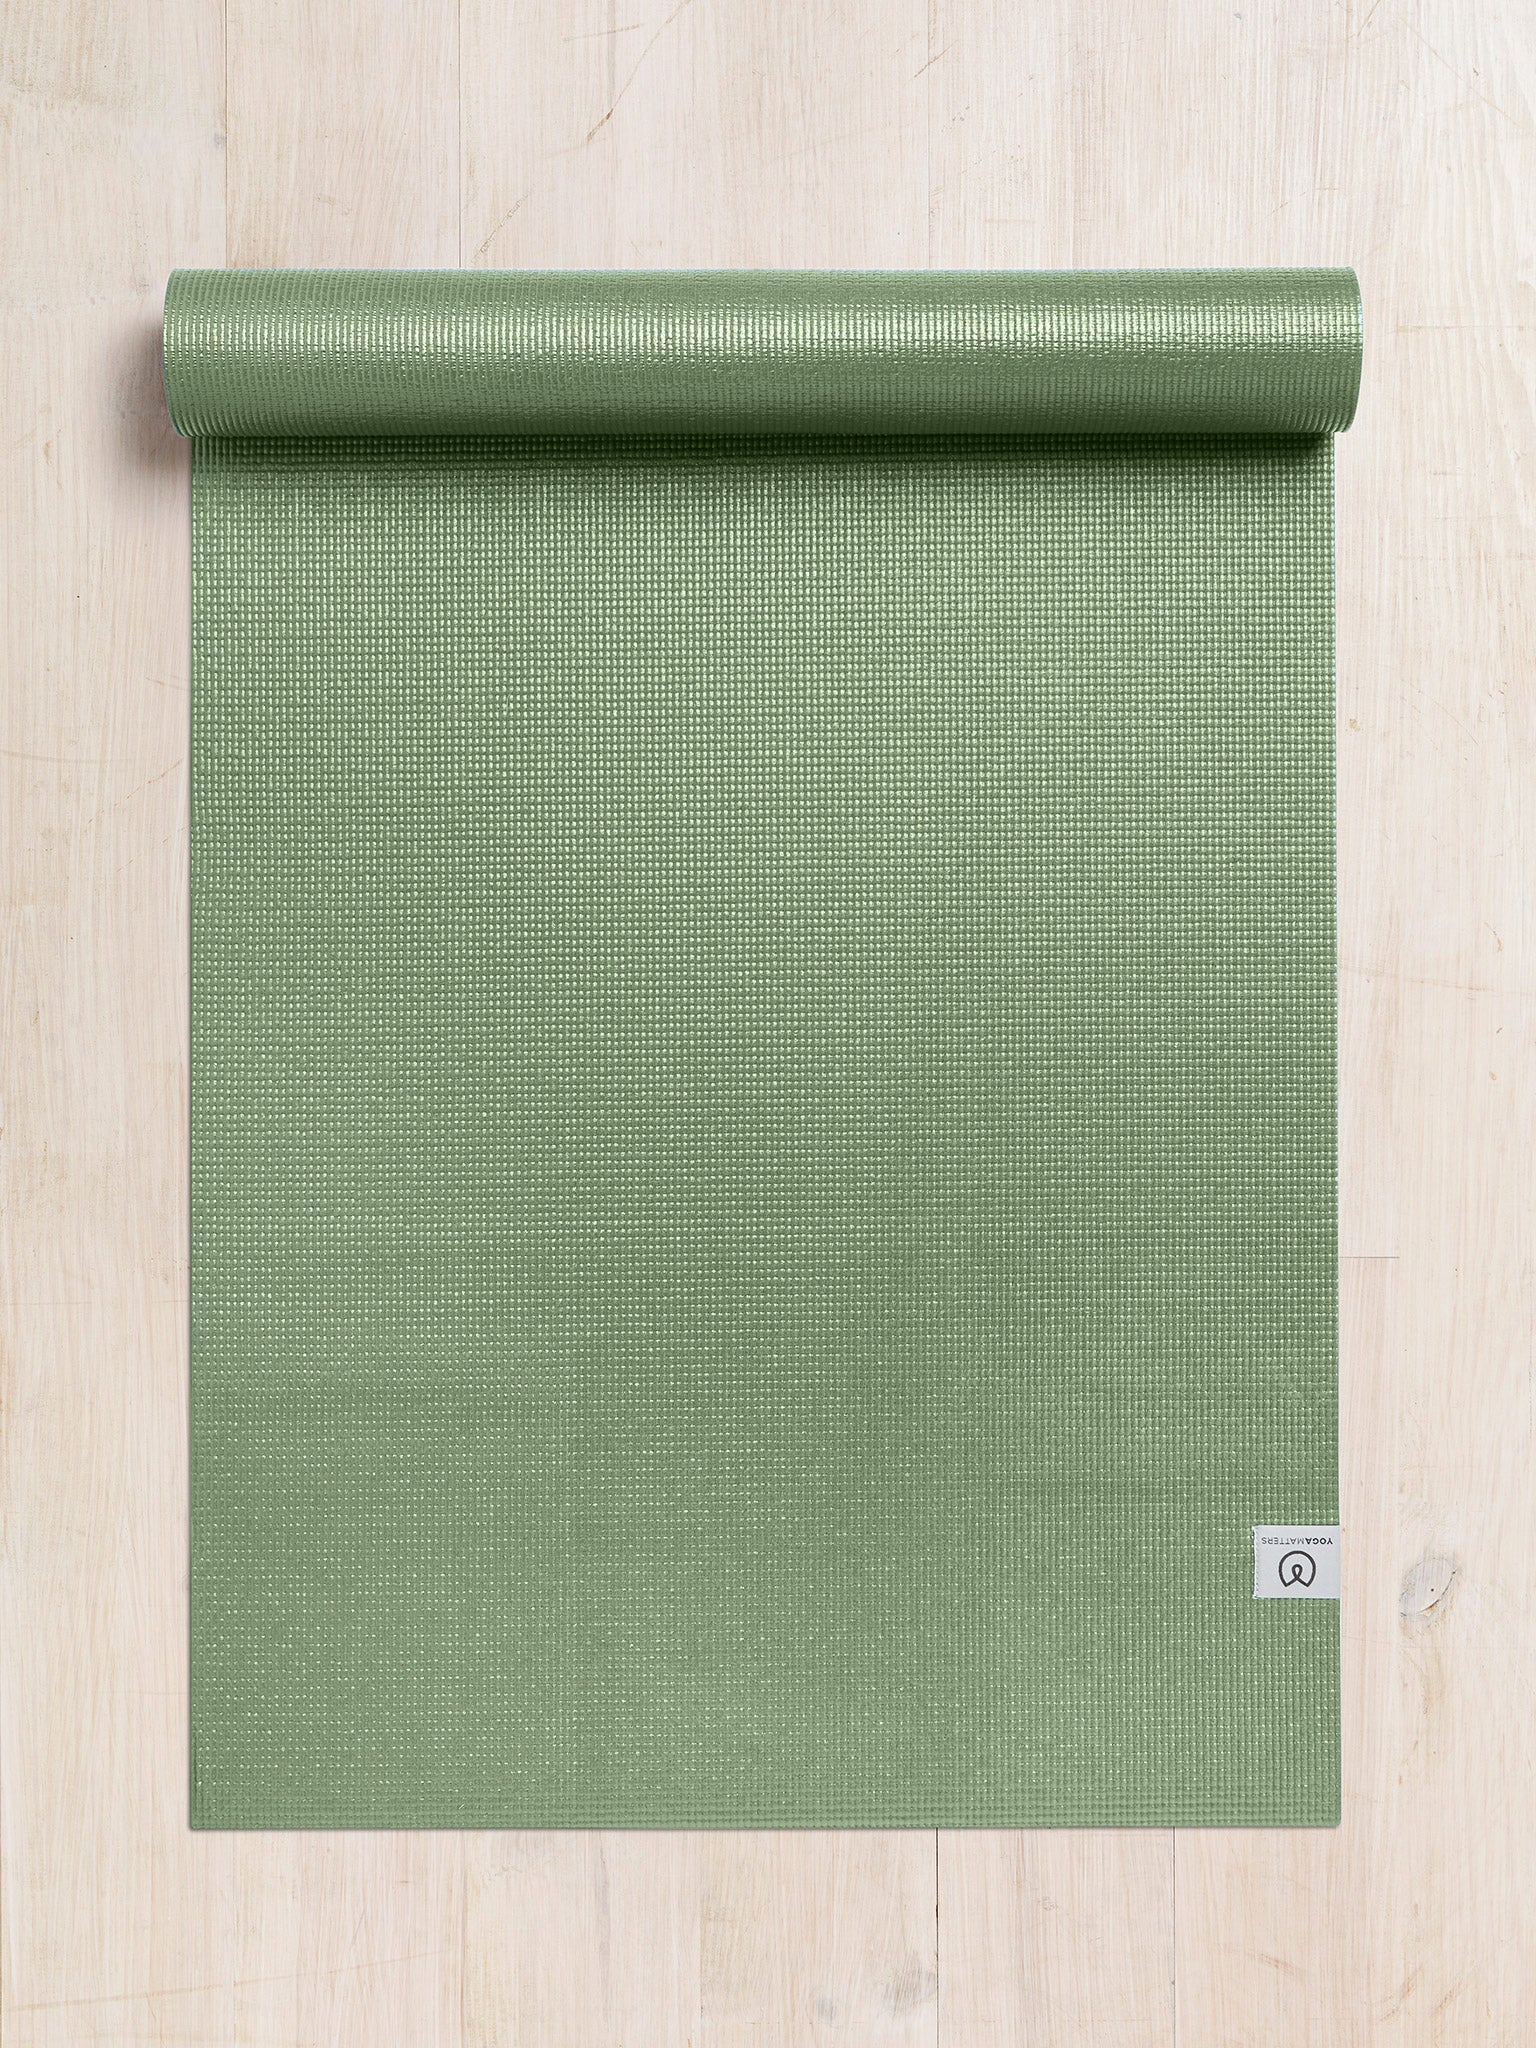 Green textured yoga mat partially rolled from top on wooden floor, top view, non-slip surface, exercise and wellness accessory